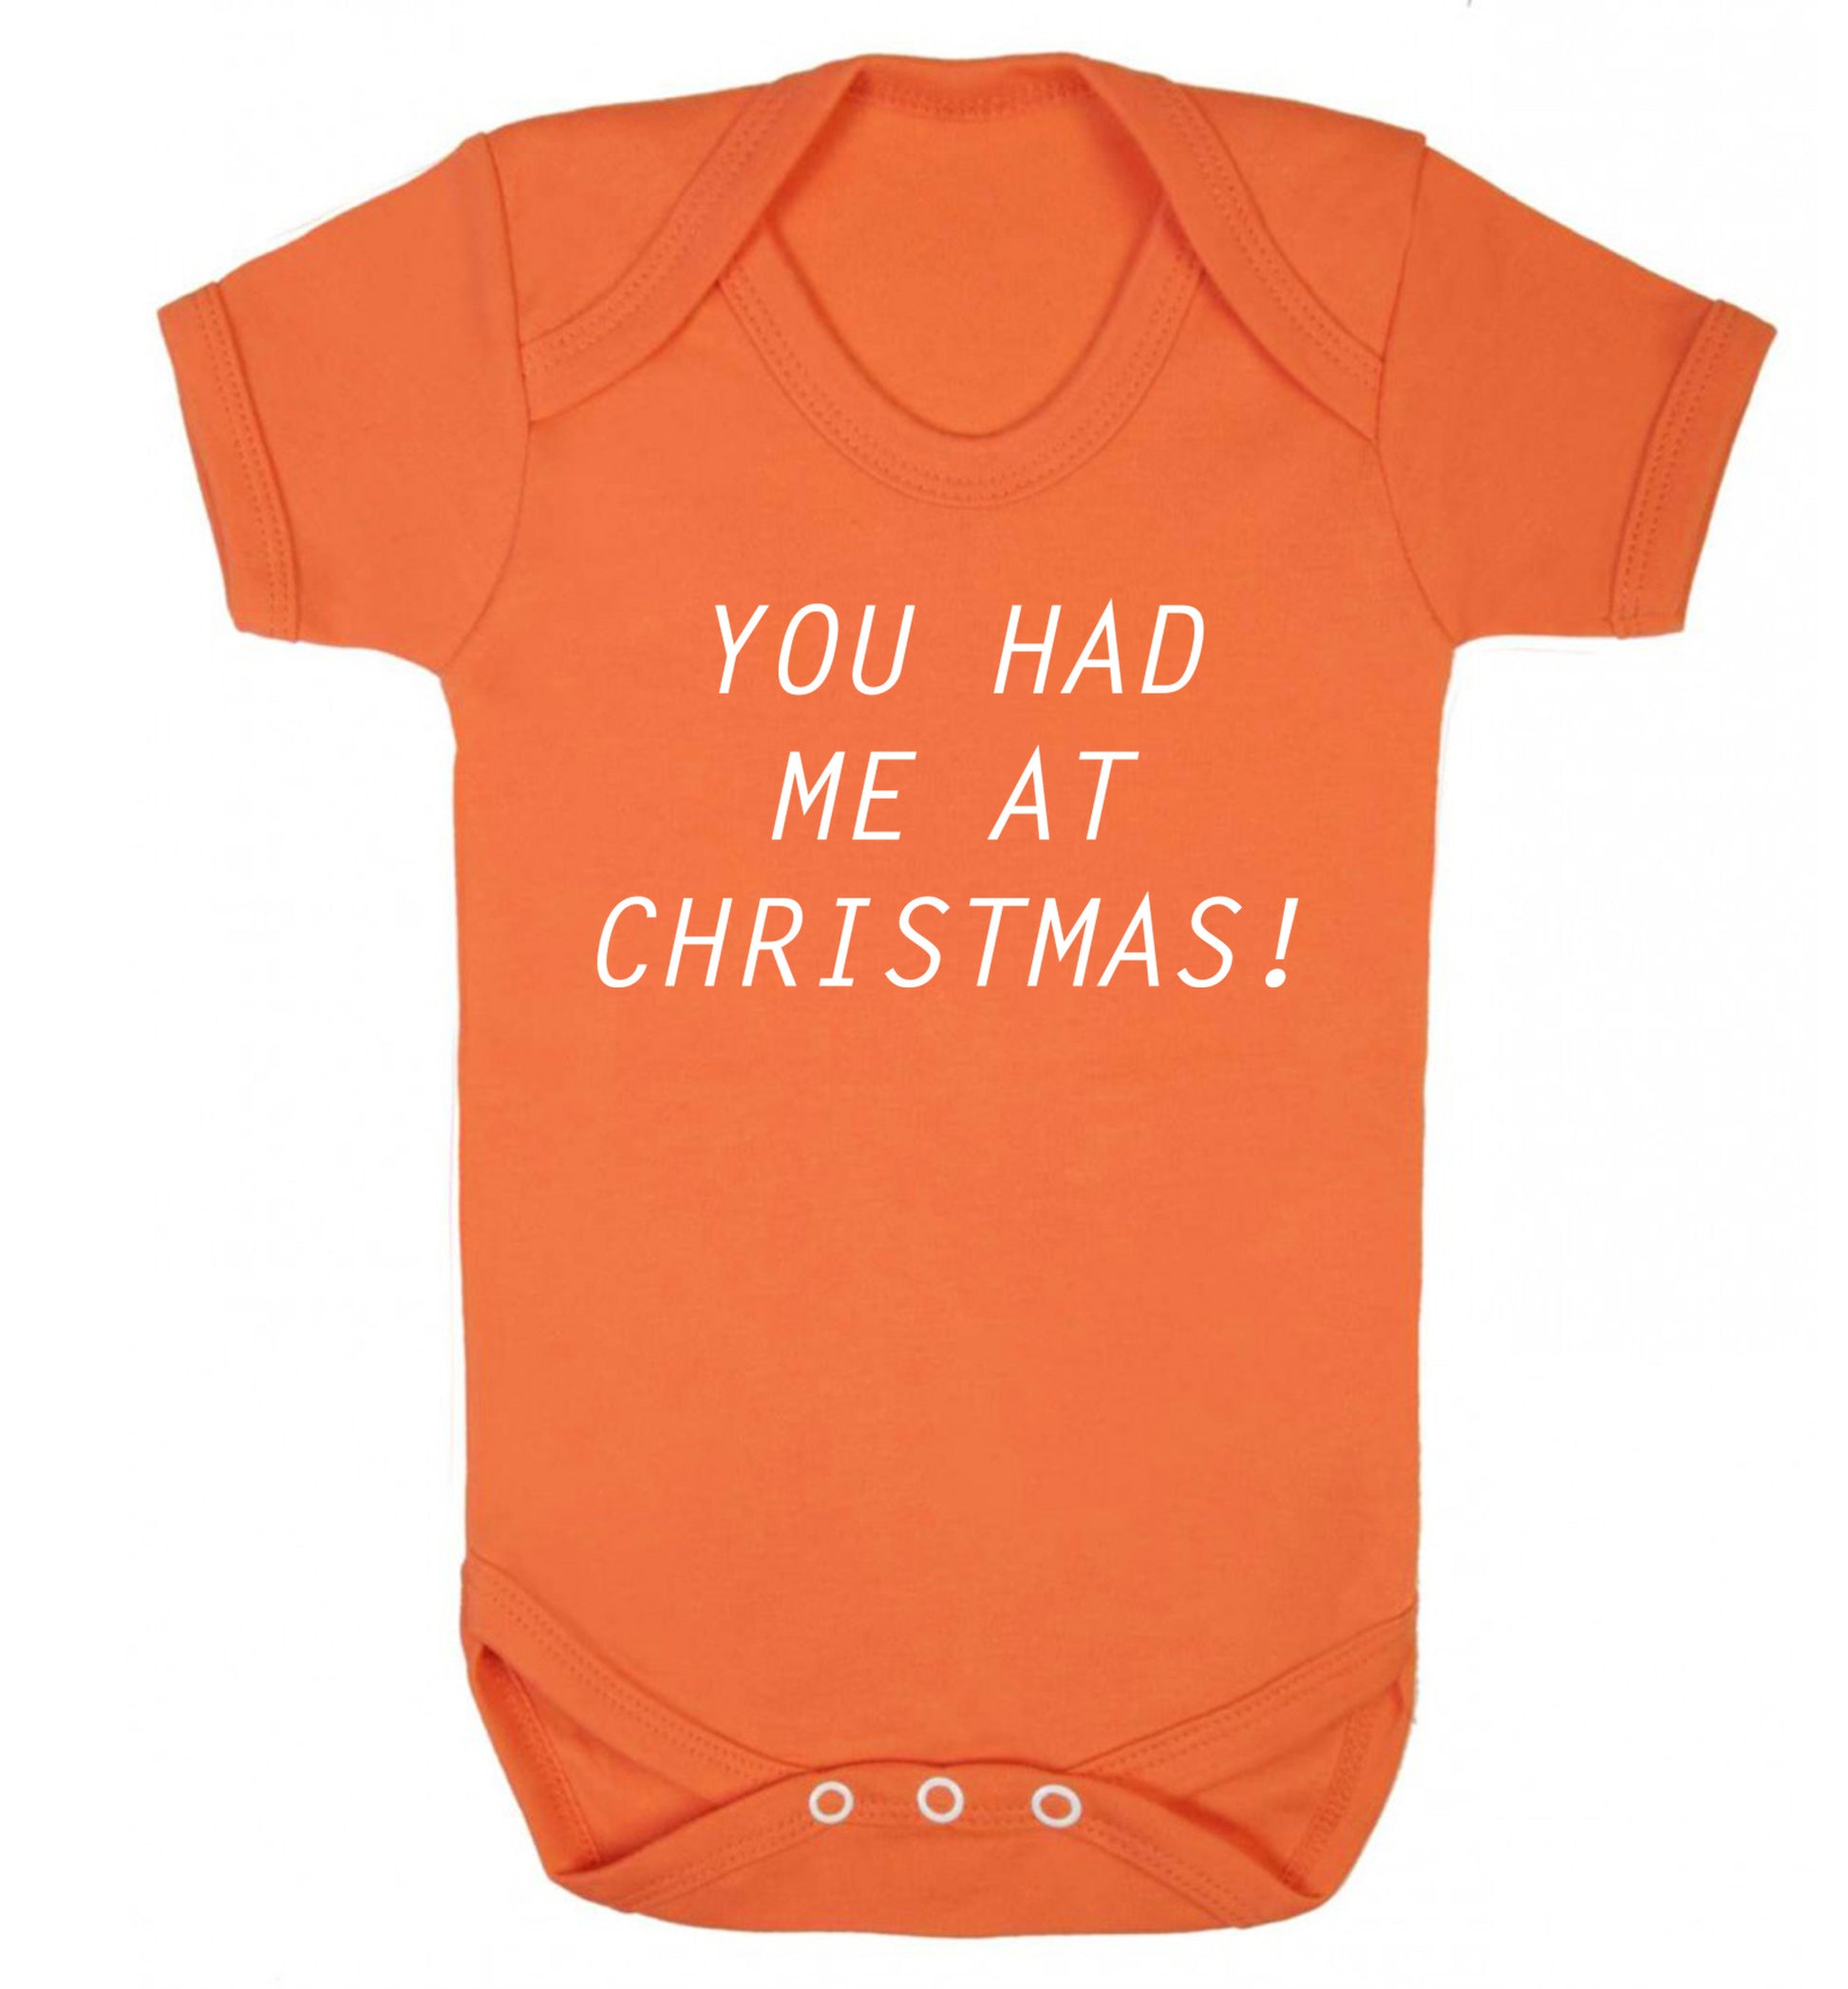 You had me at Christmas Baby Vest orange 18-24 months